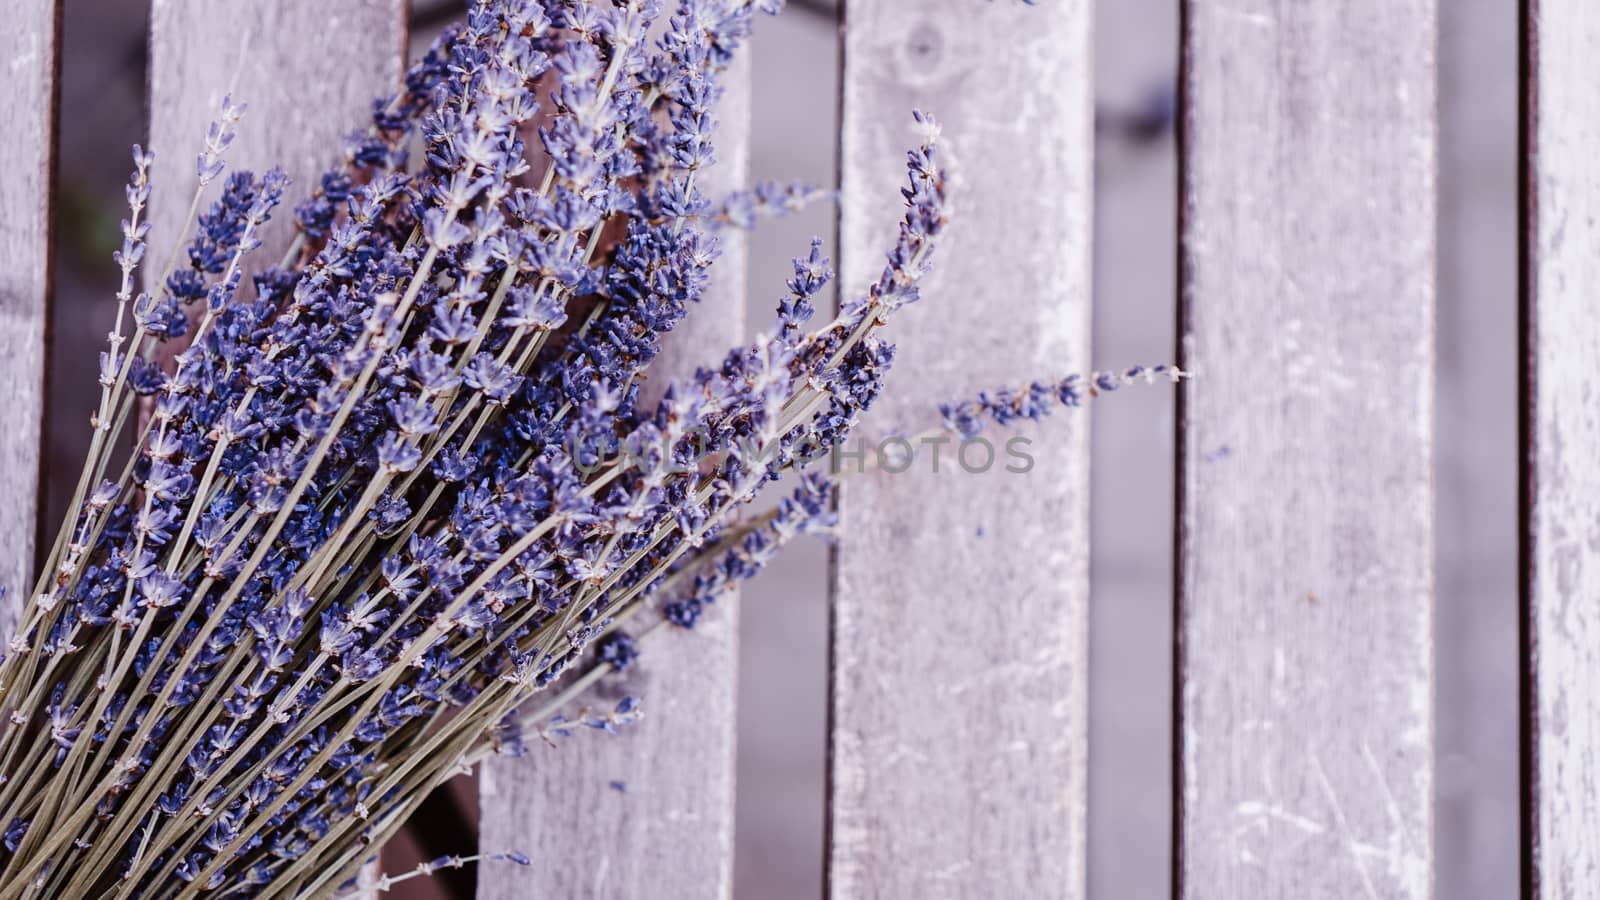 Dried lavender bunches on wooden table background